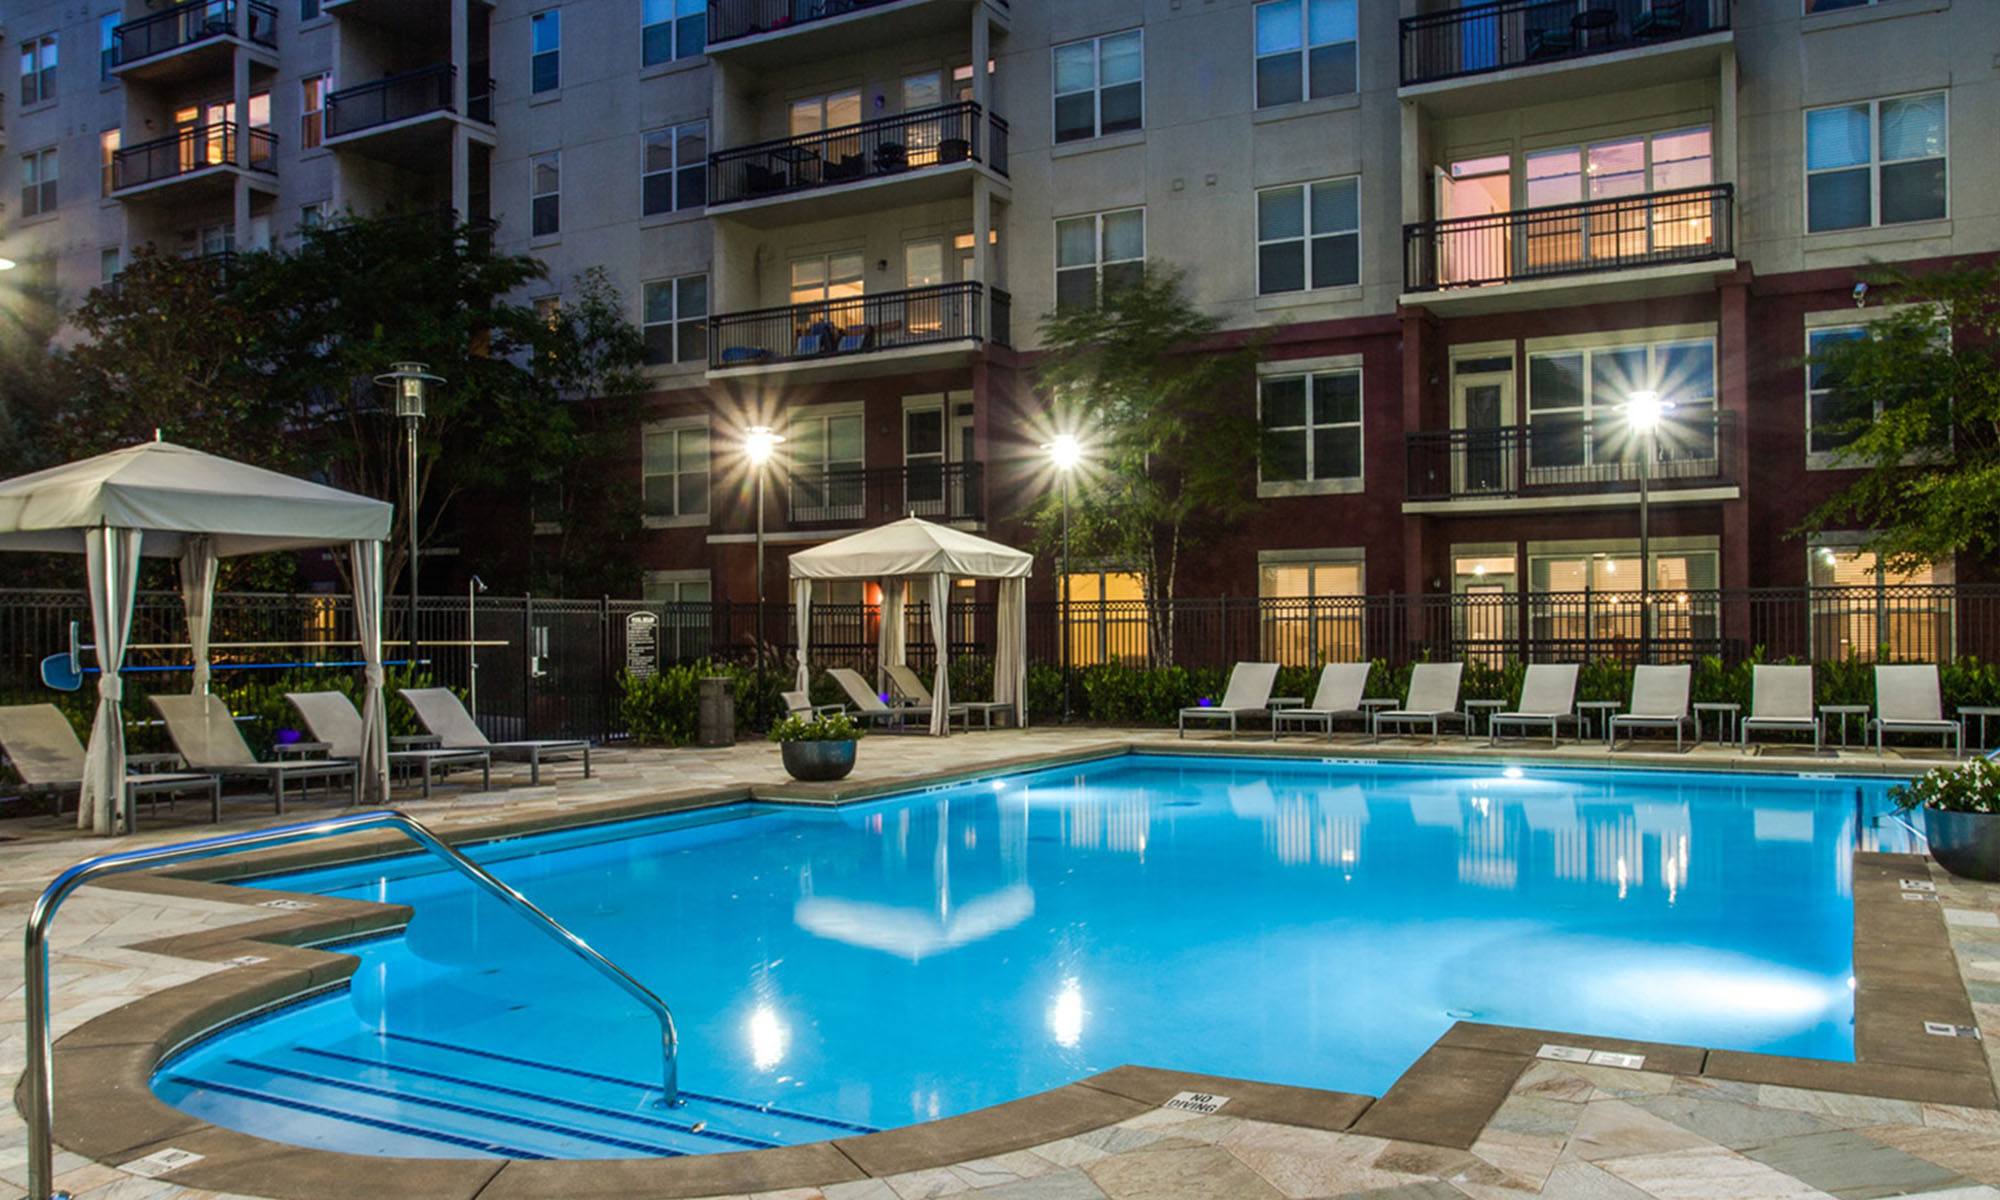 Peachtree Dunwoody Place Apartments